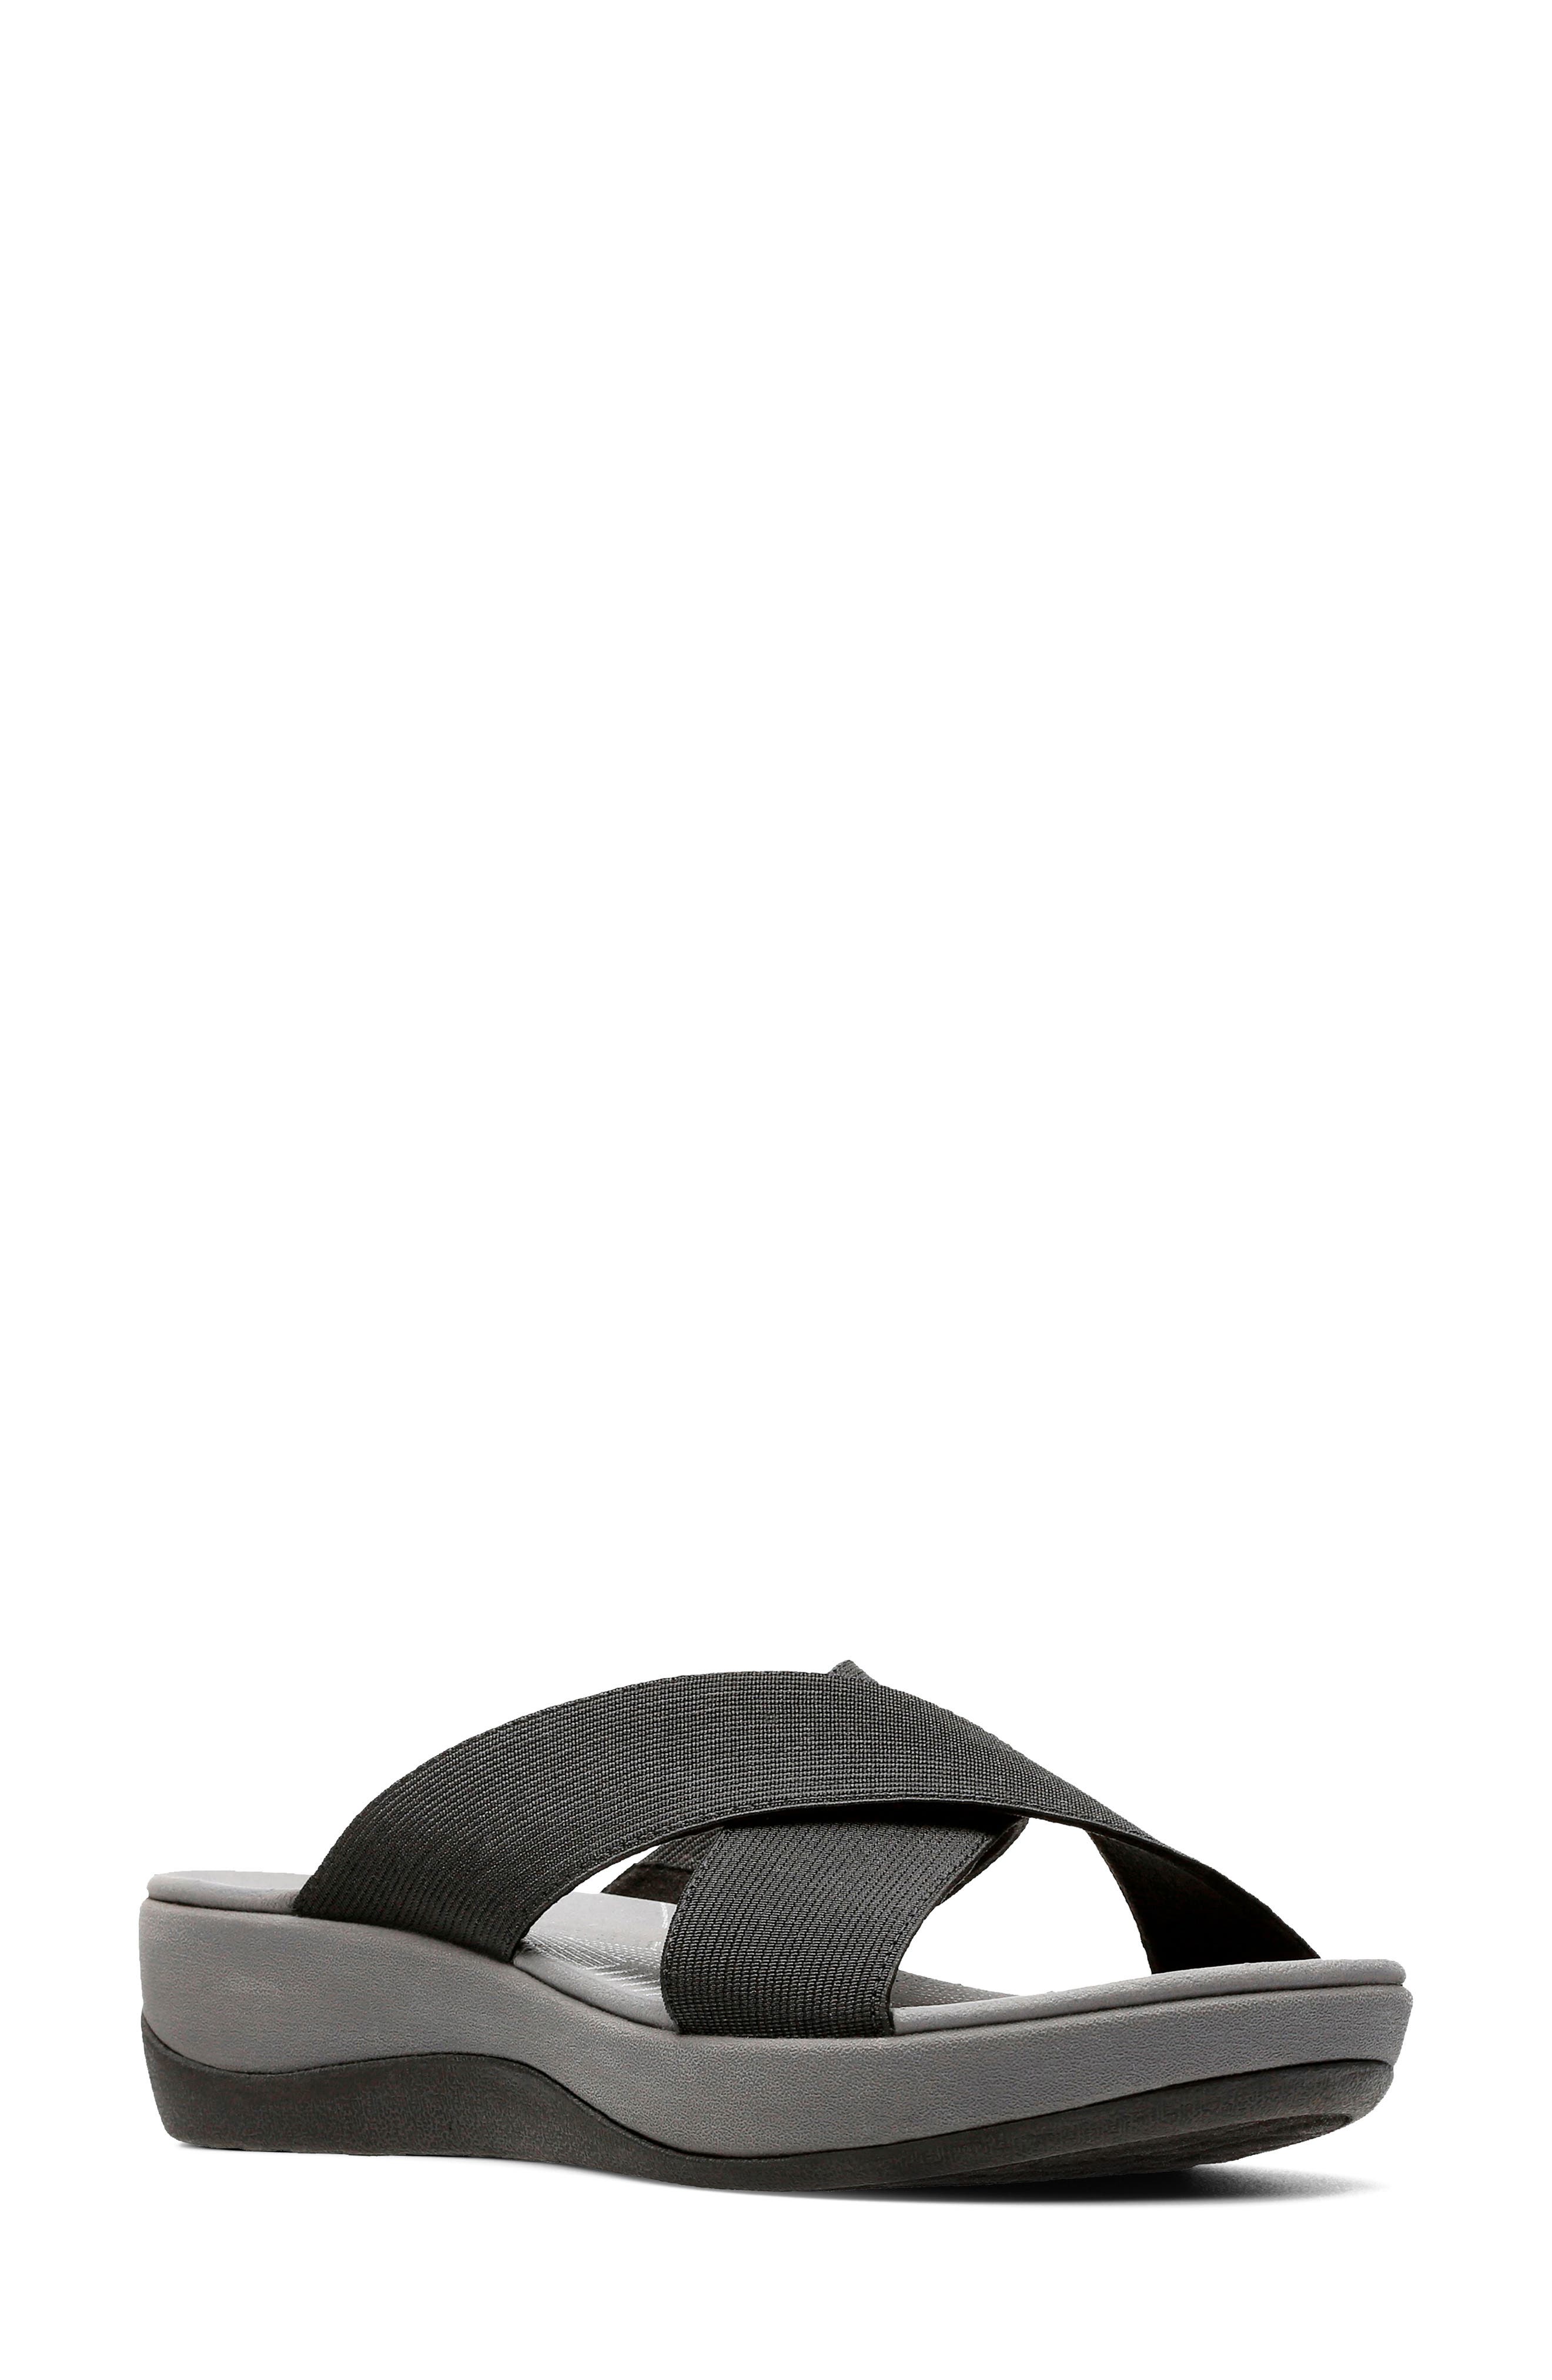 clarks womens sandals arch support